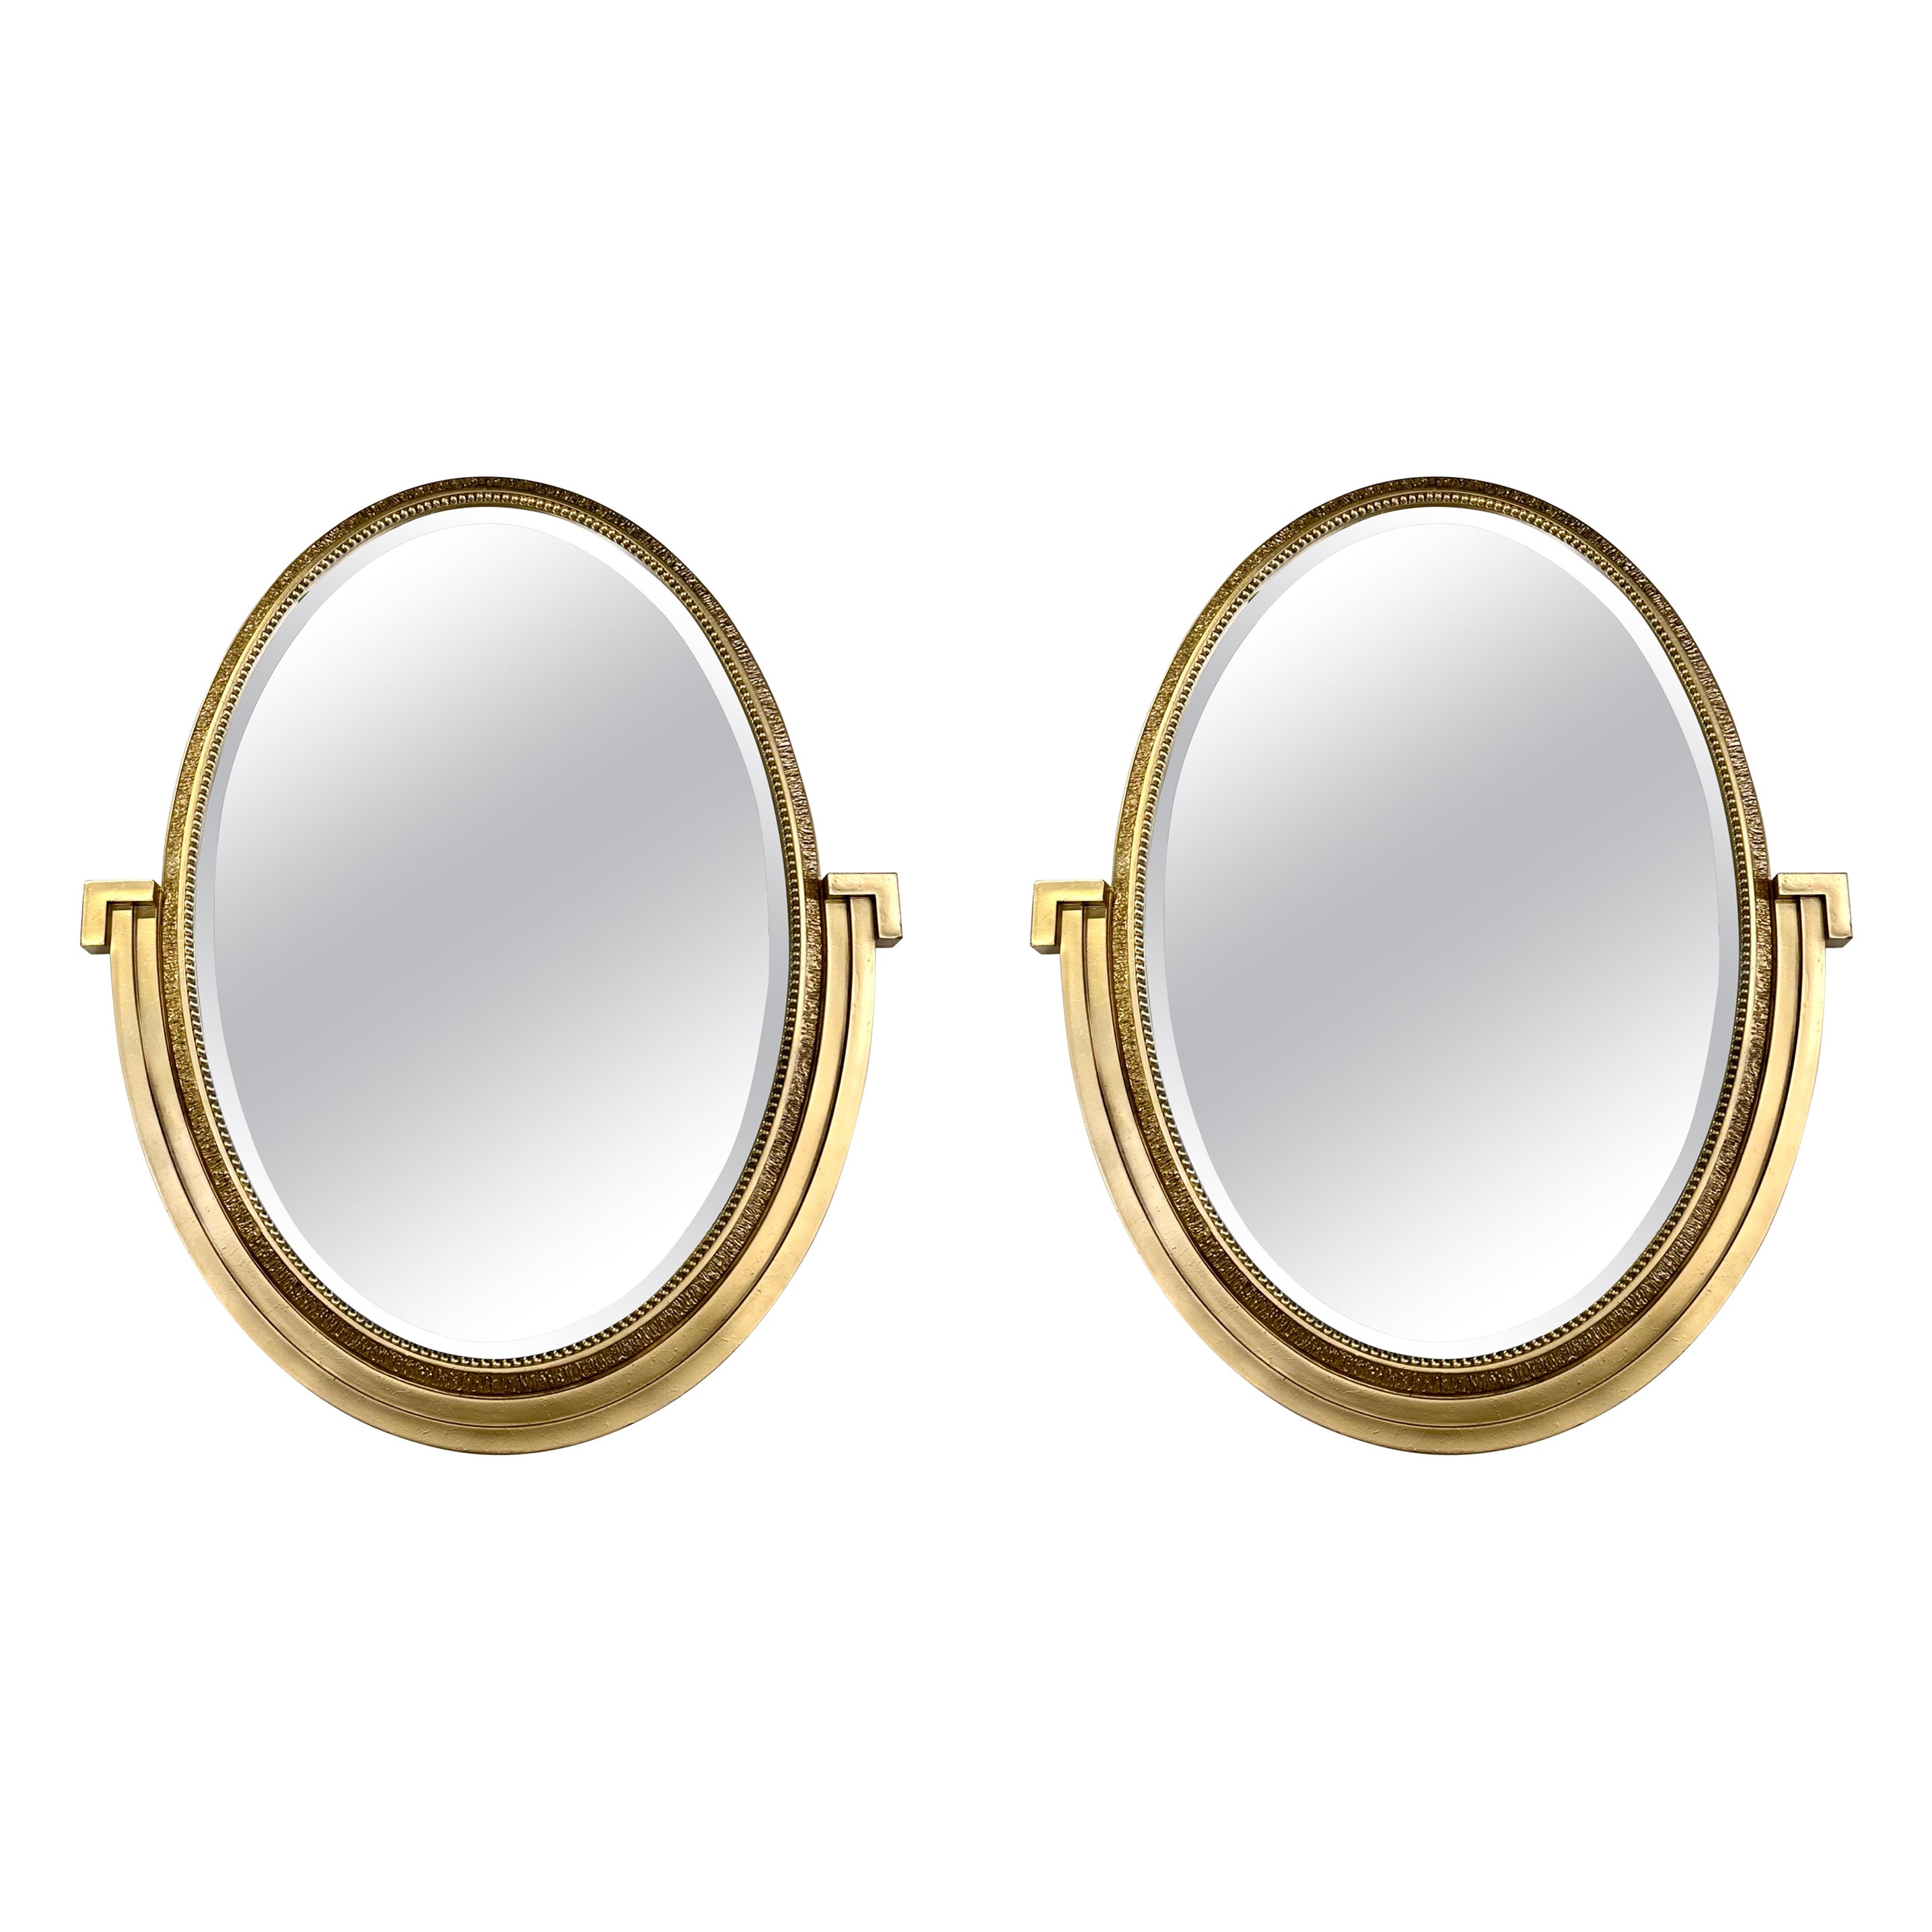 Pair of Neoclassical Gilded Wood Oval Mirrors For Sale